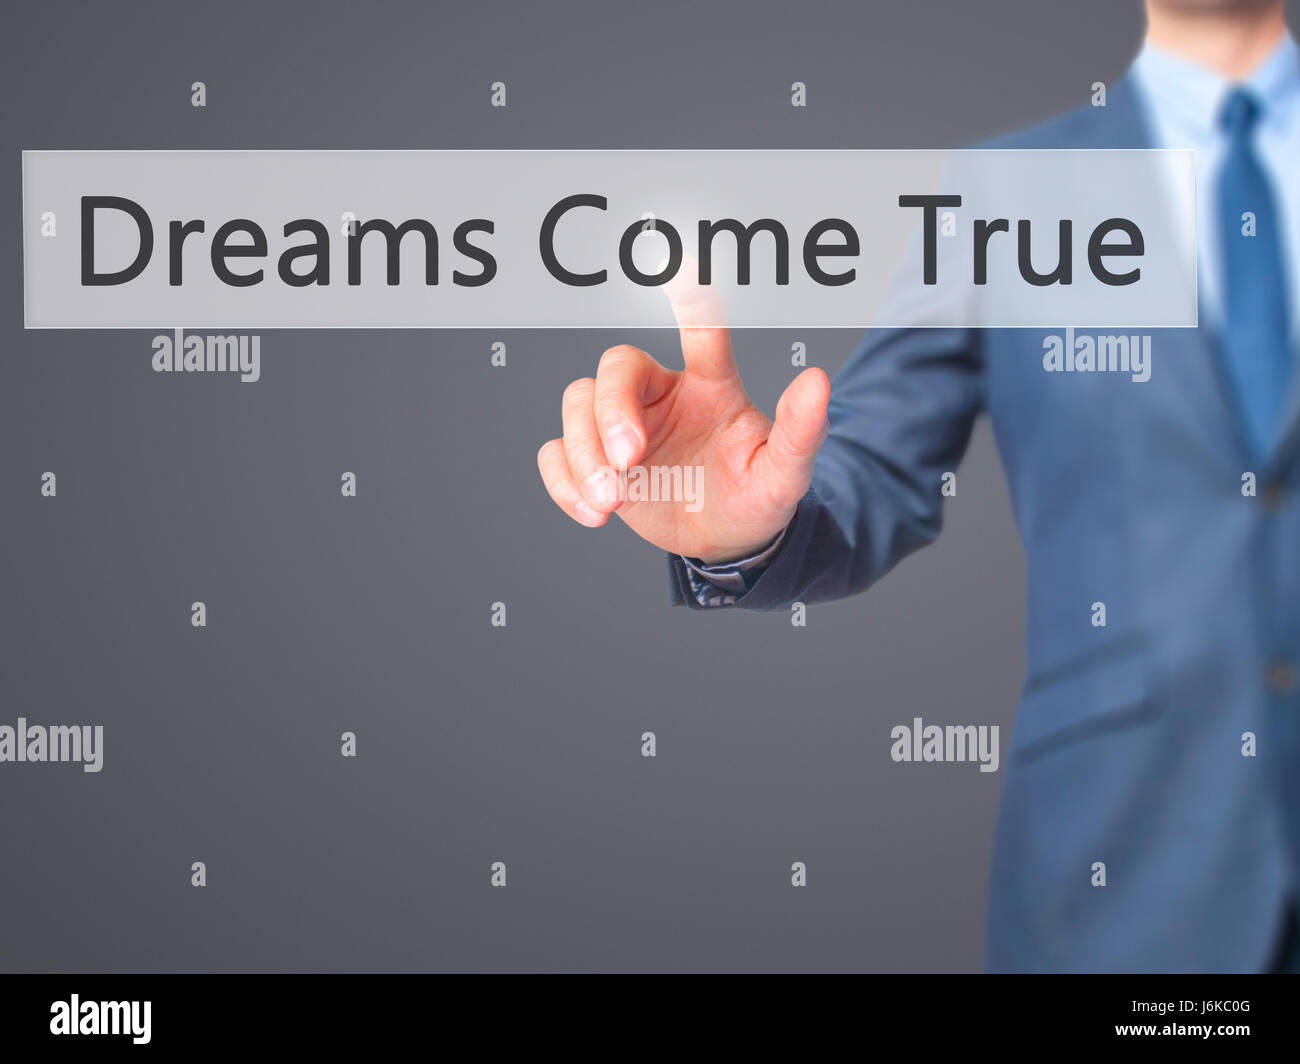 Dreams Come True - Businessman hand pressing button on touch screen interface. Business, technology, internet concept. Stock Photo Stock Photo